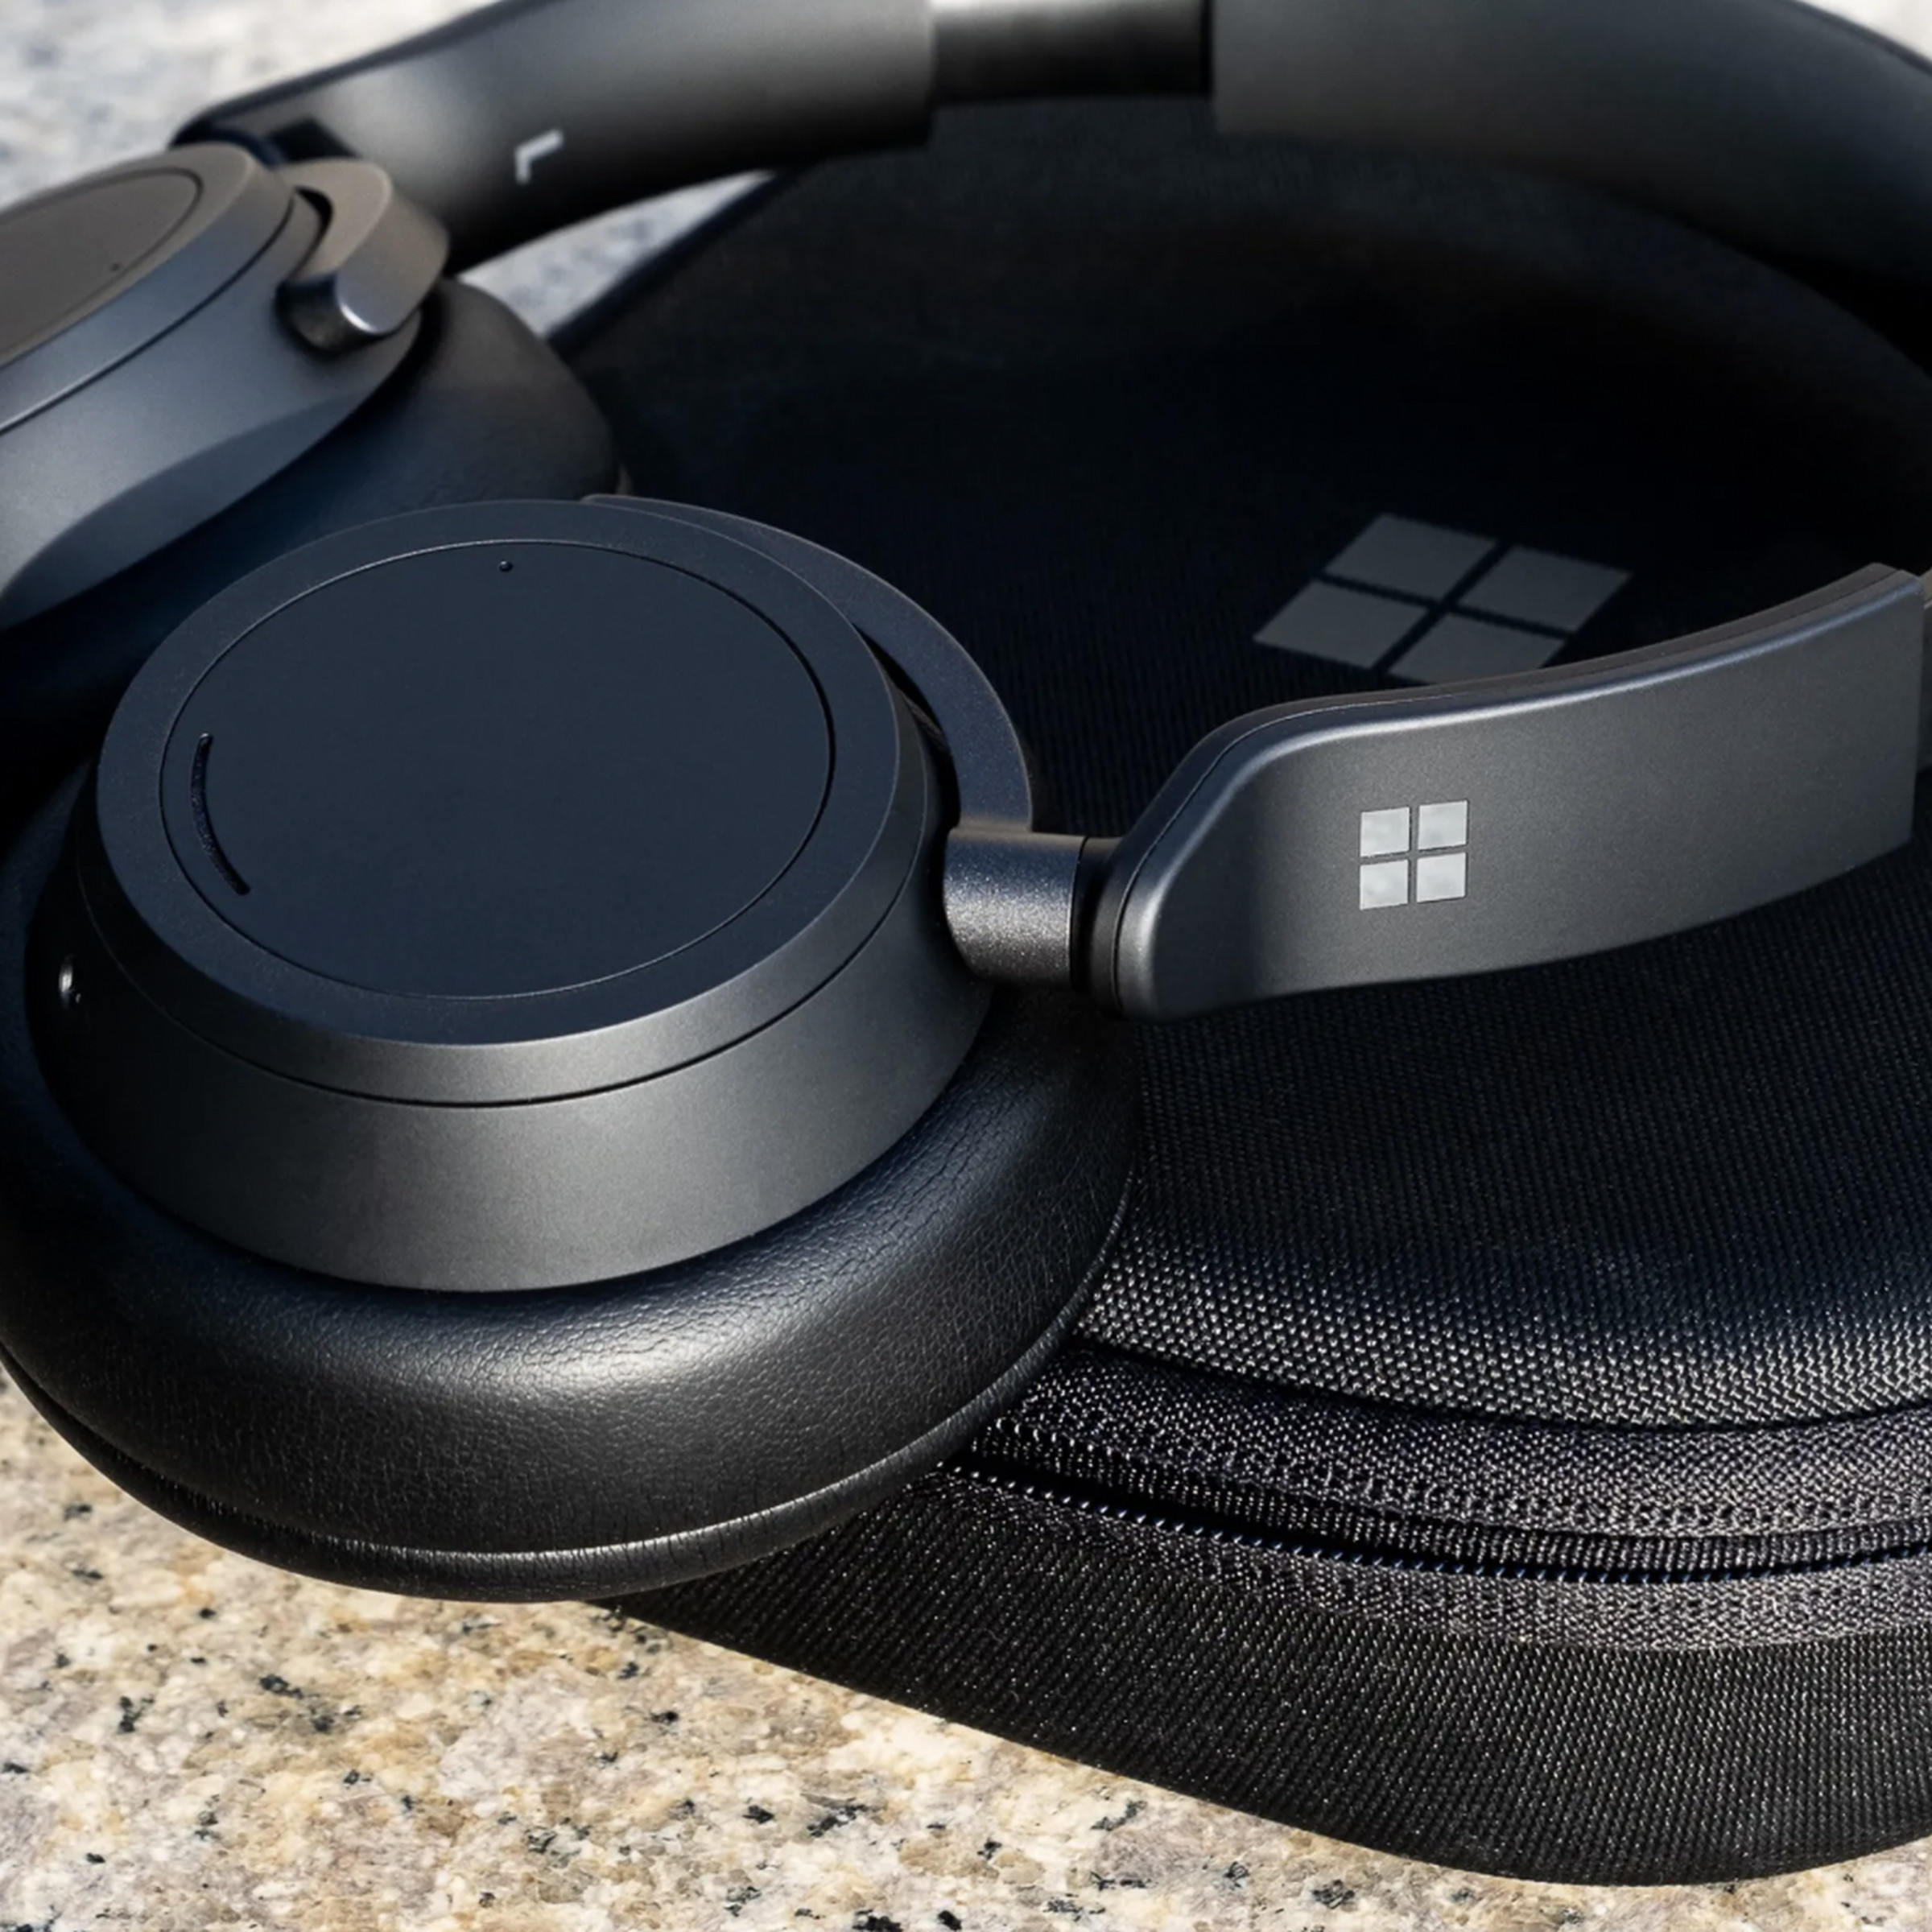 Microsoft’s Surface Headphones 2 are selling for their second-best price to date at Amazon.